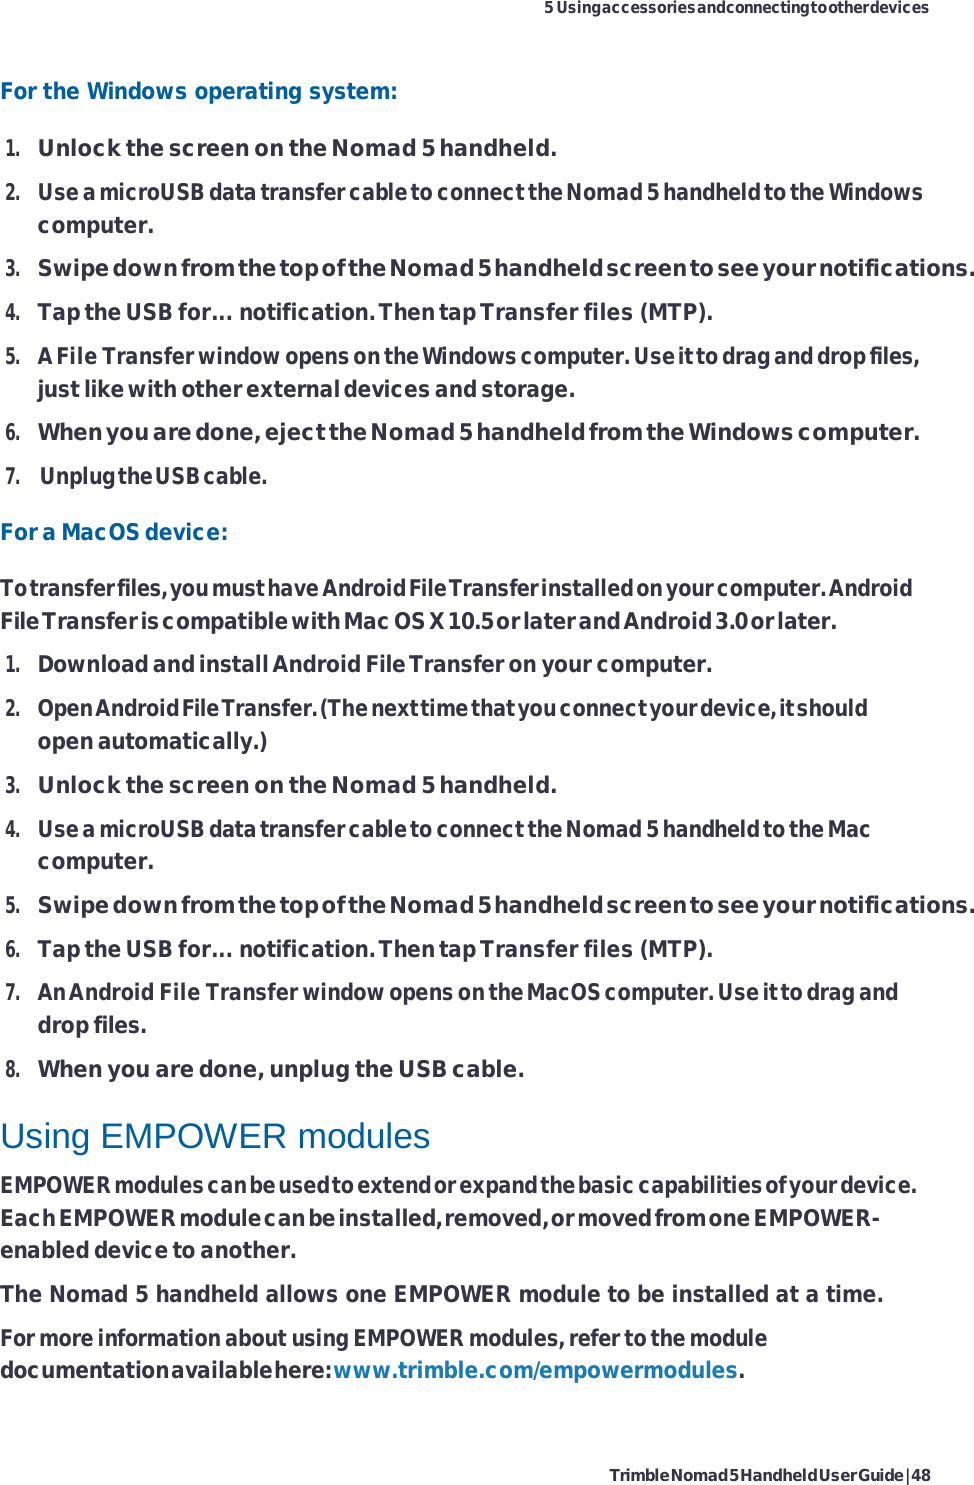 Trimble Nomad 5 Handheld User Guide | 48 5 Using accessories and connecting to other devices    For the Windows operating system: 1. Unlock the screen on the Nomad 5 handheld. 2. Use a microUSB data transfer cable to connect the Nomad 5 handheld to the Windows computer. 3. Swipe down from the top of the Nomad 5 handheld screen to see your notifications. 4. Tap the USB for... notification. Then tap Transfer files (MTP). 5. A File Transfer window opens on the Windows computer. Use it to drag and drop files, just like with other external devices and storage. 6. When you are done, eject the Nomad 5 handheld from the Windows computer. 7. Unplug the USB cable. For a MacOS device: To transfer files, you must have Android File Transfer installed on your computer. Android File Transfer is compatible with Mac OS X 10.5 or later and Android 3.0 or later. 1. Download and install Android File Transfer on your computer. 2. Open Android File Transfer. (The next time that you connect your device, it should open automatically.) 3. Unlock the screen on the Nomad 5 handheld. 4. Use a microUSB data transfer cable to connect the Nomad 5 handheld to the Mac computer. 5. Swipe down from the top of the Nomad 5 handheld screen to see your notifications. 6. Tap the USB for... notification. Then tap Transfer files (MTP). 7. An Android File Transfer window opens on the MacOS computer. Use it to drag and drop files. 8. When you are done, unplug the USB cable.  Using EMPOWER modules EMPOWER modules can be used to extend or expand the basic capabilities of your device. Each EMPOWER module can be installed, removed, or moved from one EMPOWER- enabled device to another. The Nomad 5 handheld allows one EMPOWER module to be installed at a time. For more information about using EMPOWER modules, refer to the module documentation available here: www.trimble.com/empowermodules. 